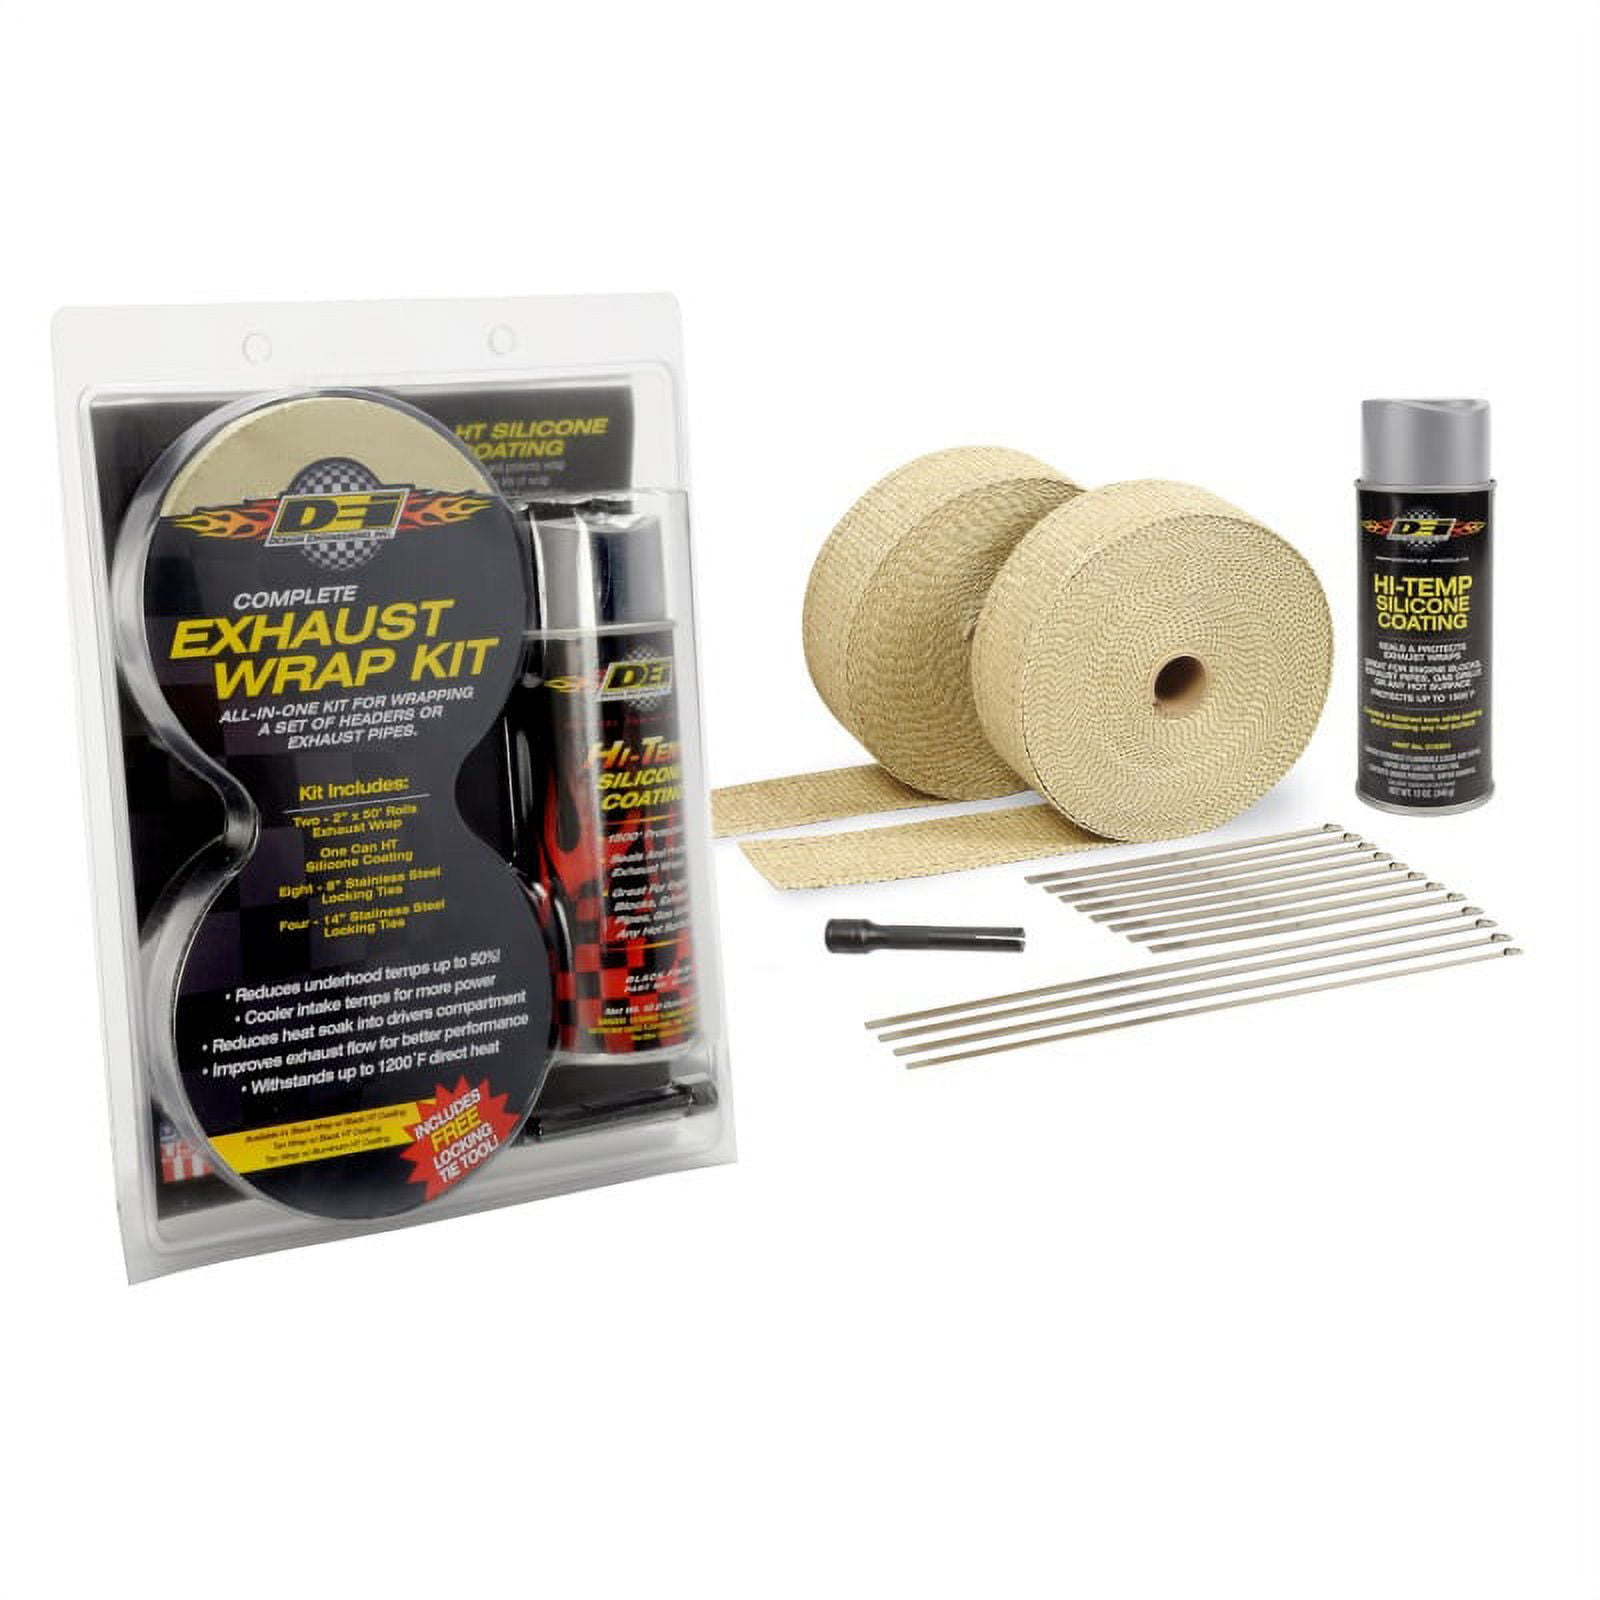 Duall-88 Leather Adhesive 4 oz. can - RH Adhesives